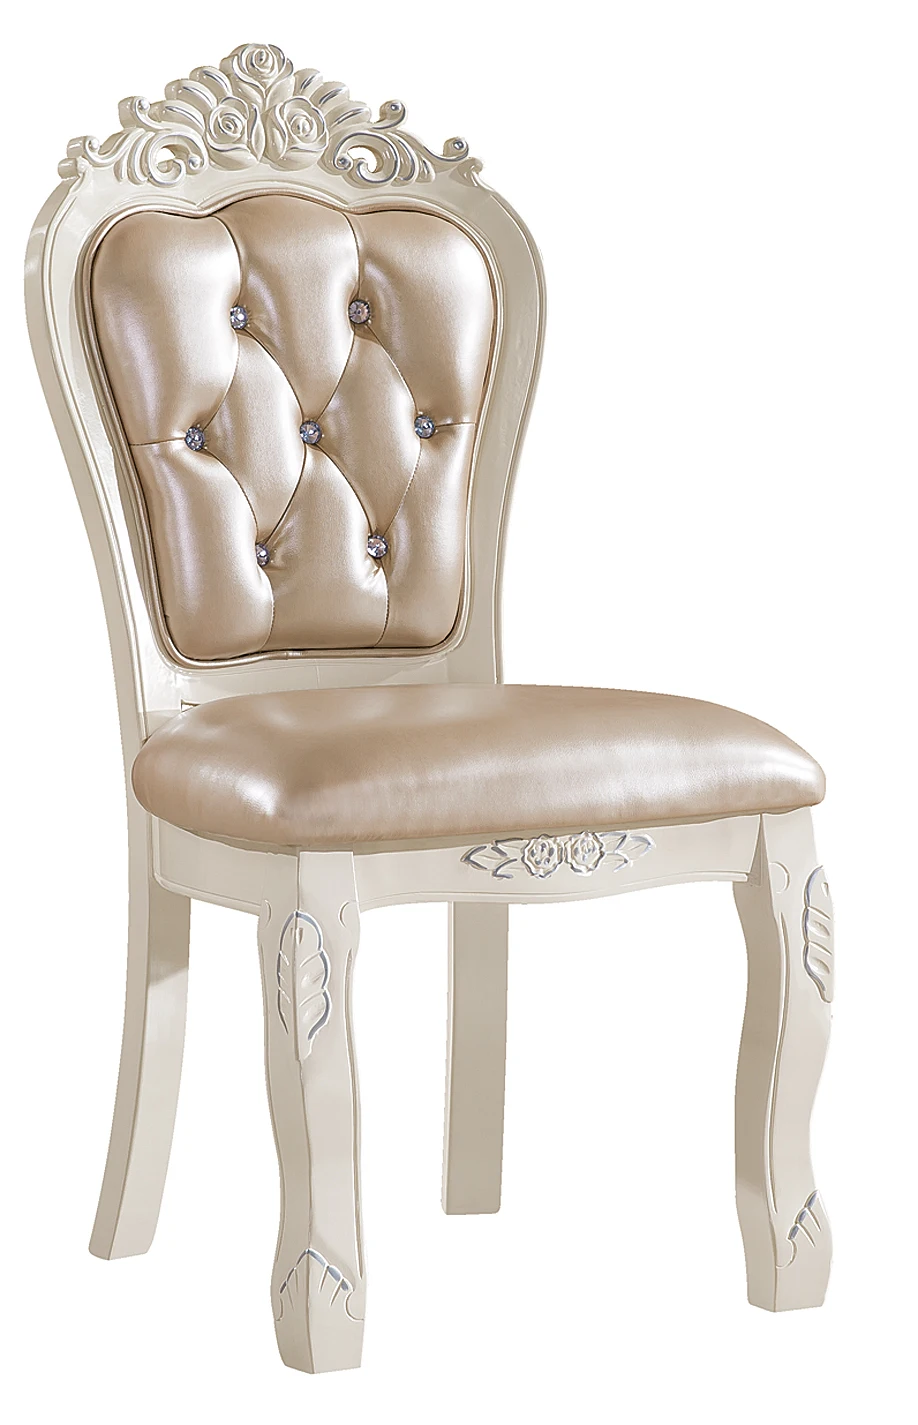 Royal Luxury Upholstered Dining Chairs With Arms - Buy Upholstered